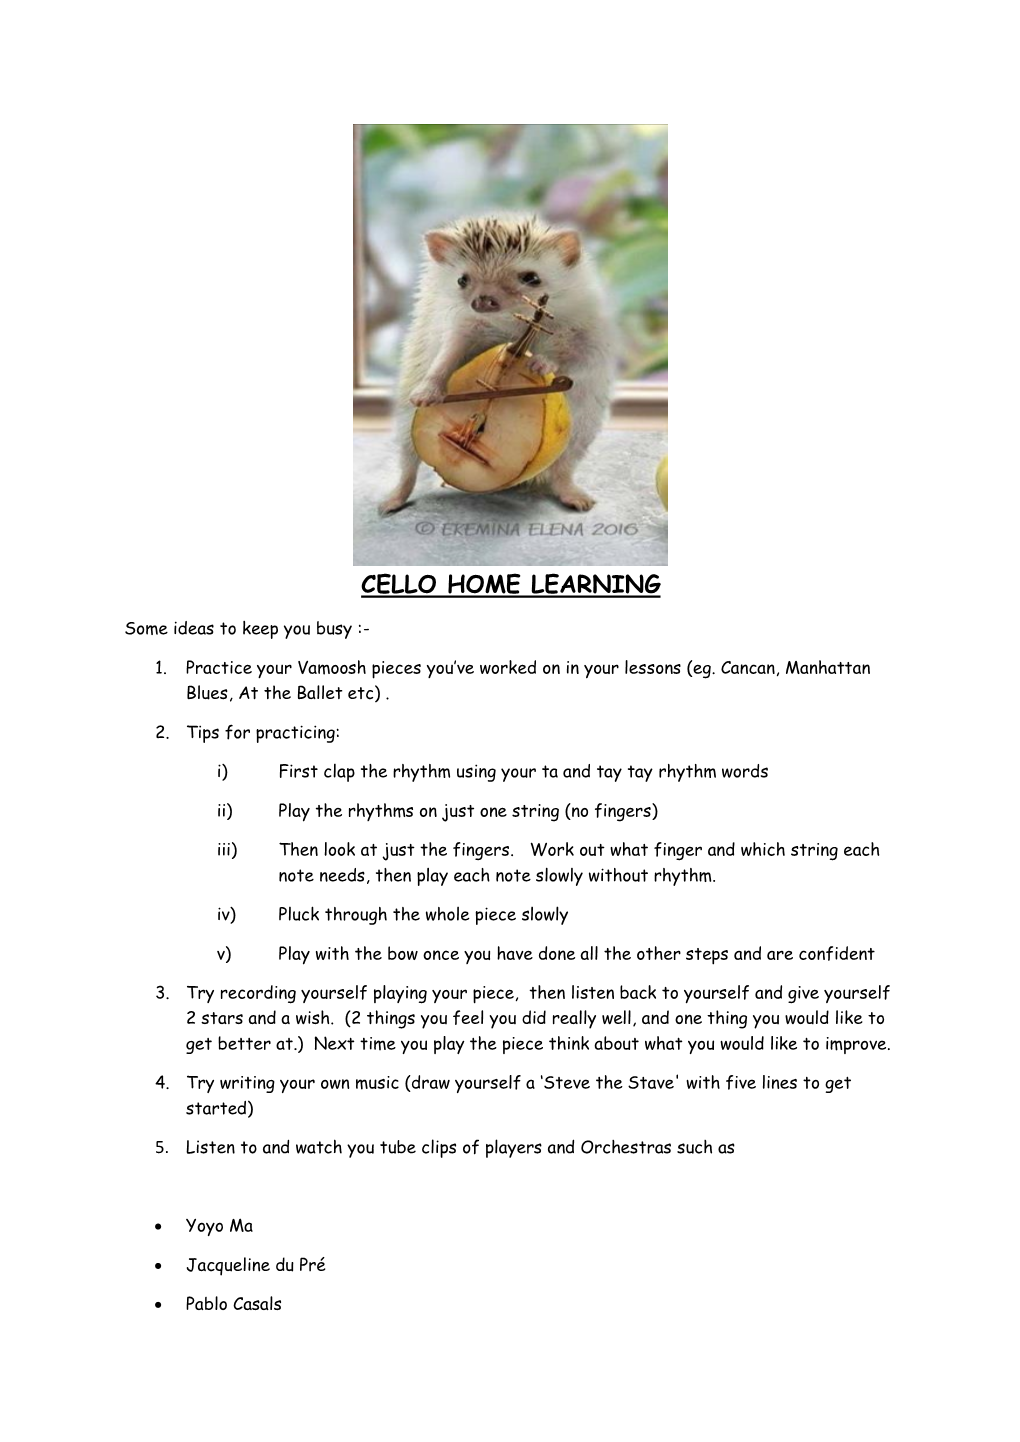 Cello Home Learning